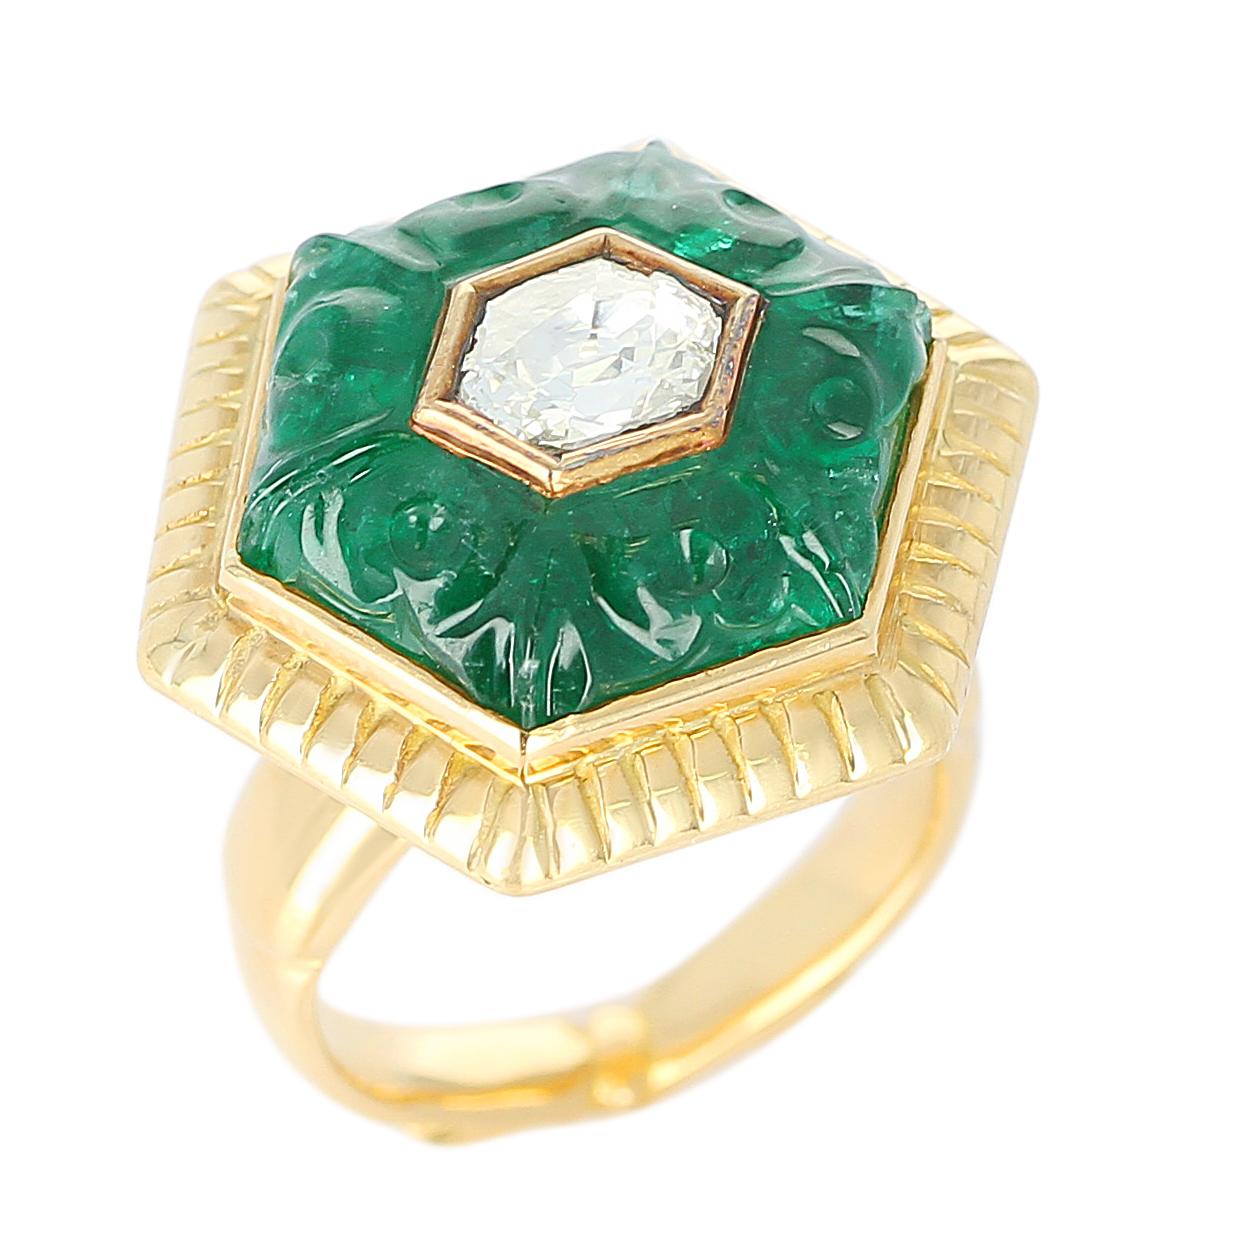 An Emerald Carving Ring with a Diamond Rose Cut in the middle, in 22 Karat Yellow Gold. Diamond Weight: 0.75 carats, Total Weight: 18.08 grams, Ring Size US 5.75.